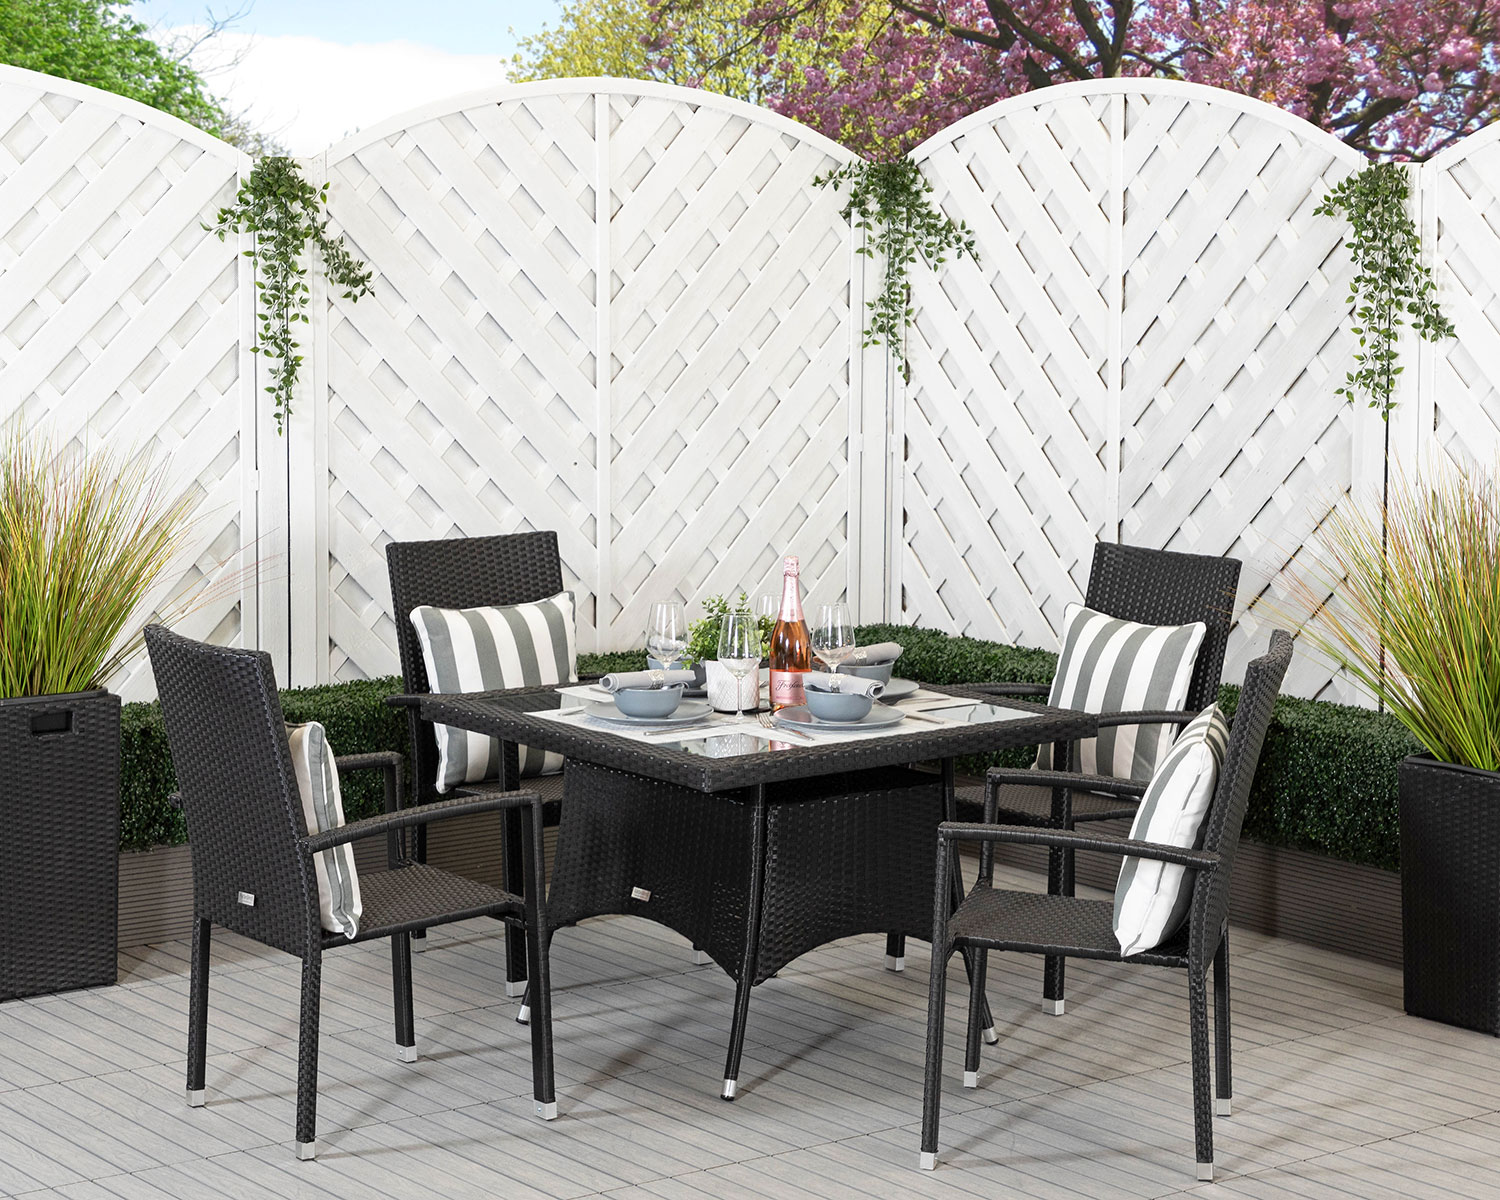 4 Seat Rattan Garden Dining Set With Square Dining Table In Black Rio Rattan Direct